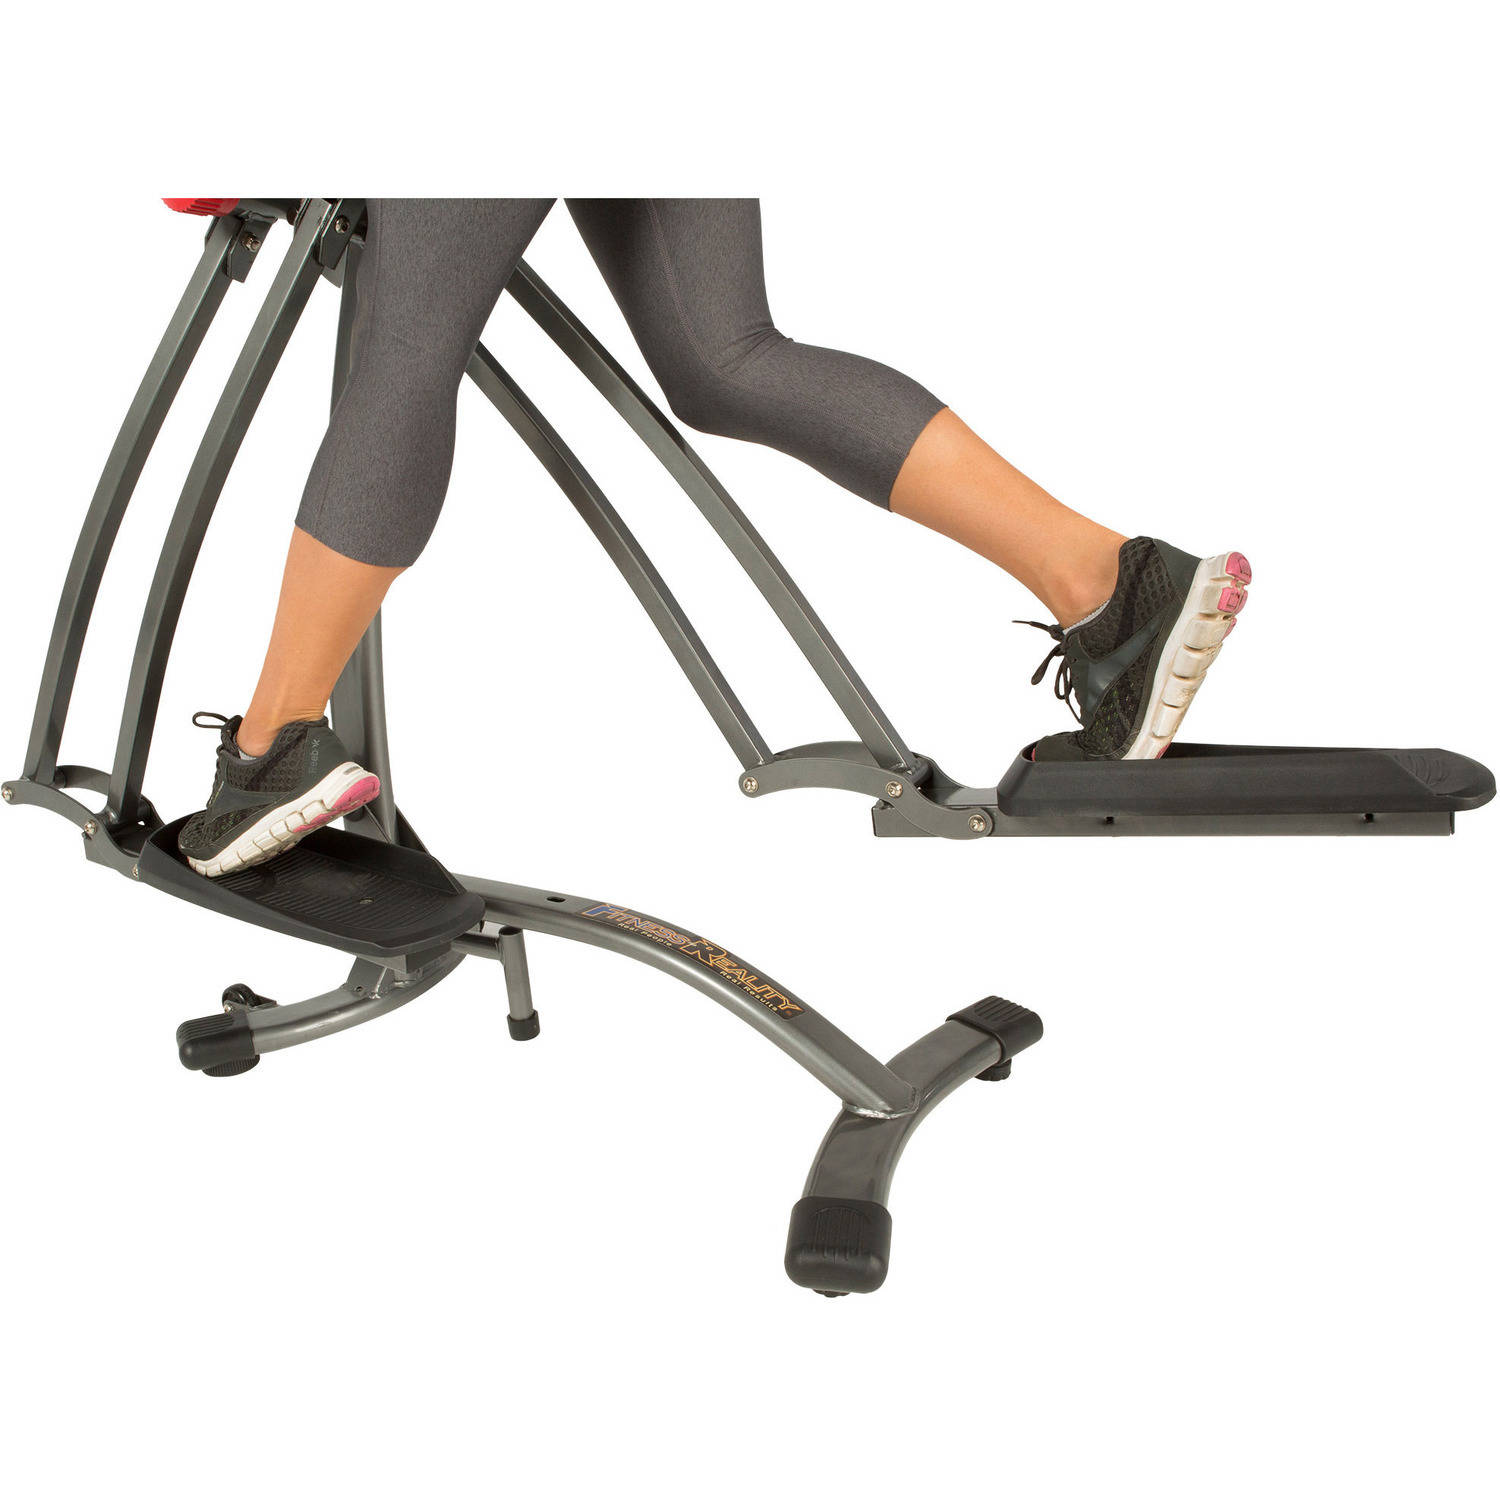 Fitness Reality Multi-Direction Elliptical Cloud Walker X1 with Pulse Sensors - image 30 of 31